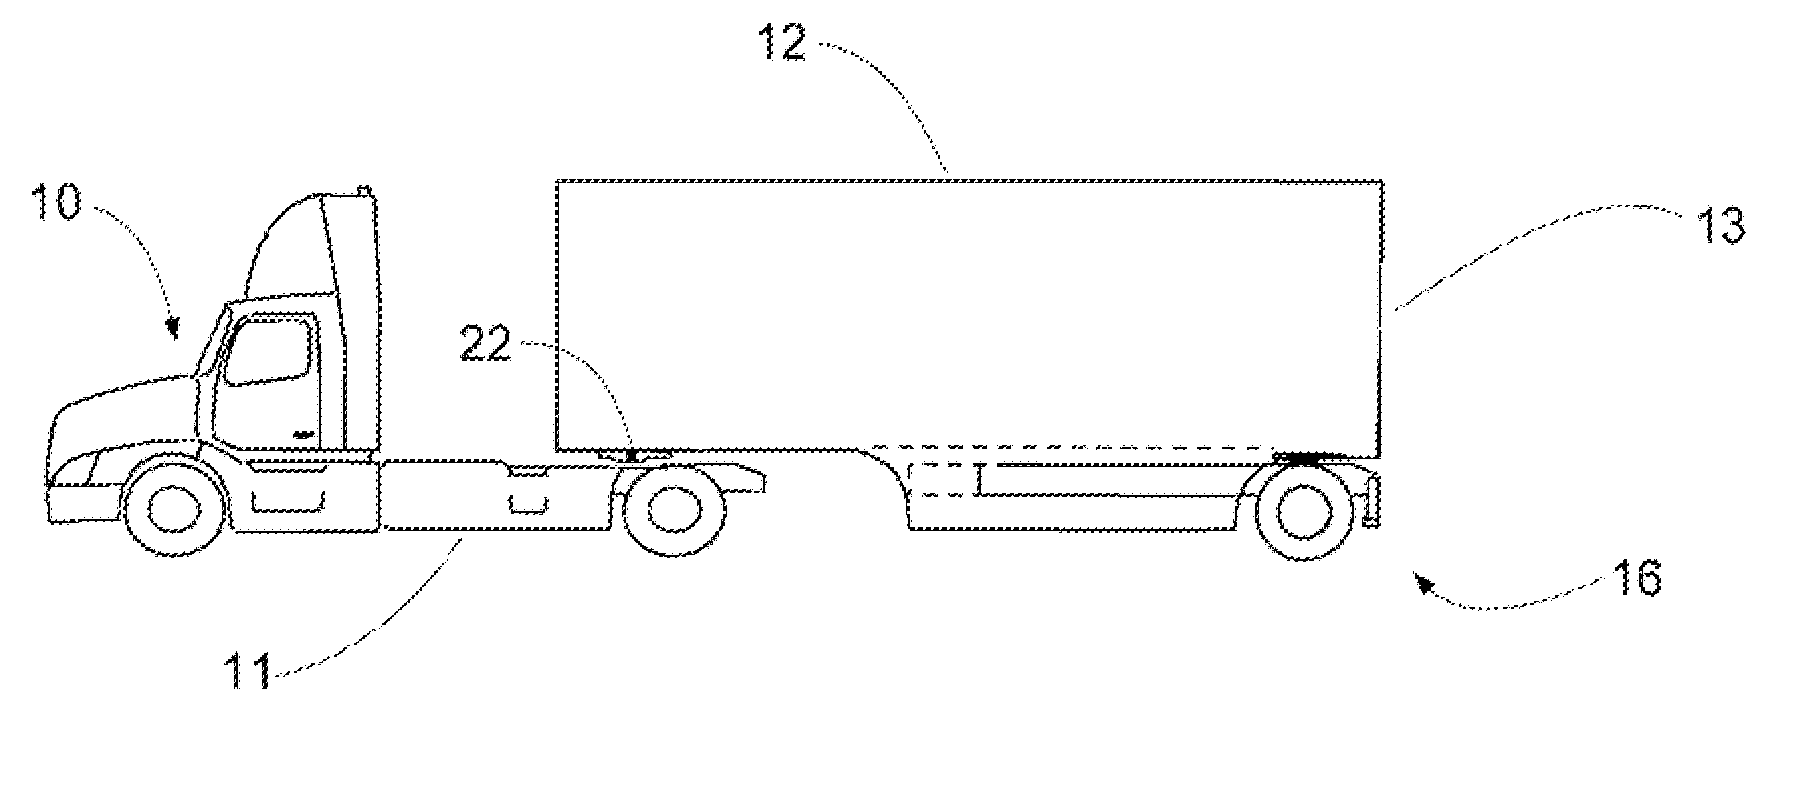 Vehicle power unit and body unit system